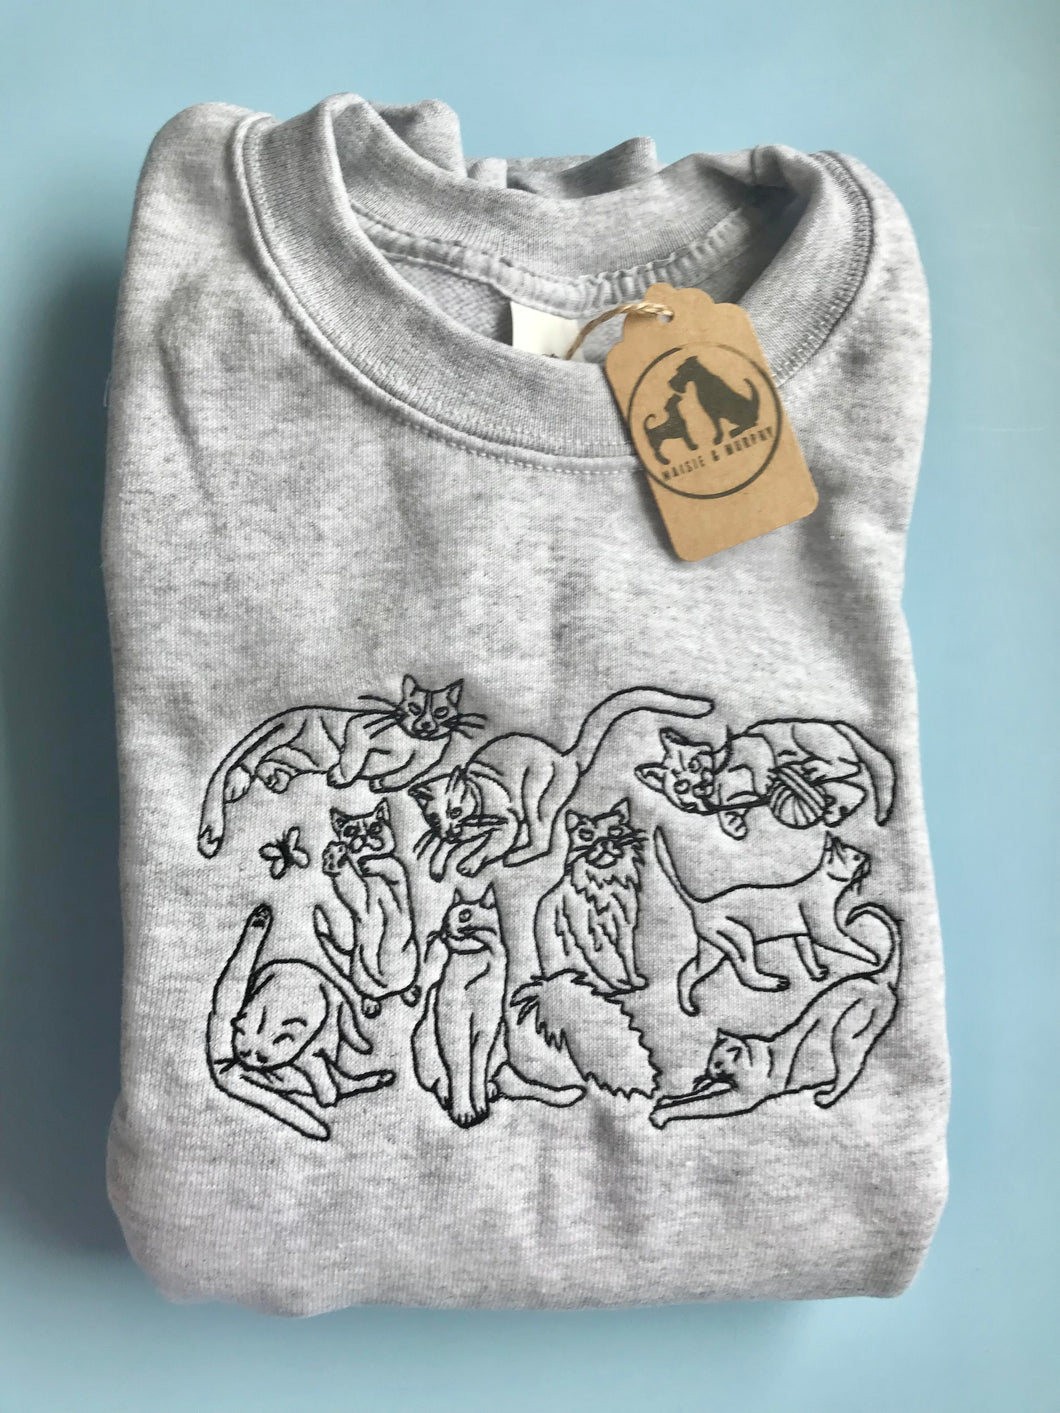 Embroidered Cats Sweatshirt - The perfect gift for cat lovers & owners